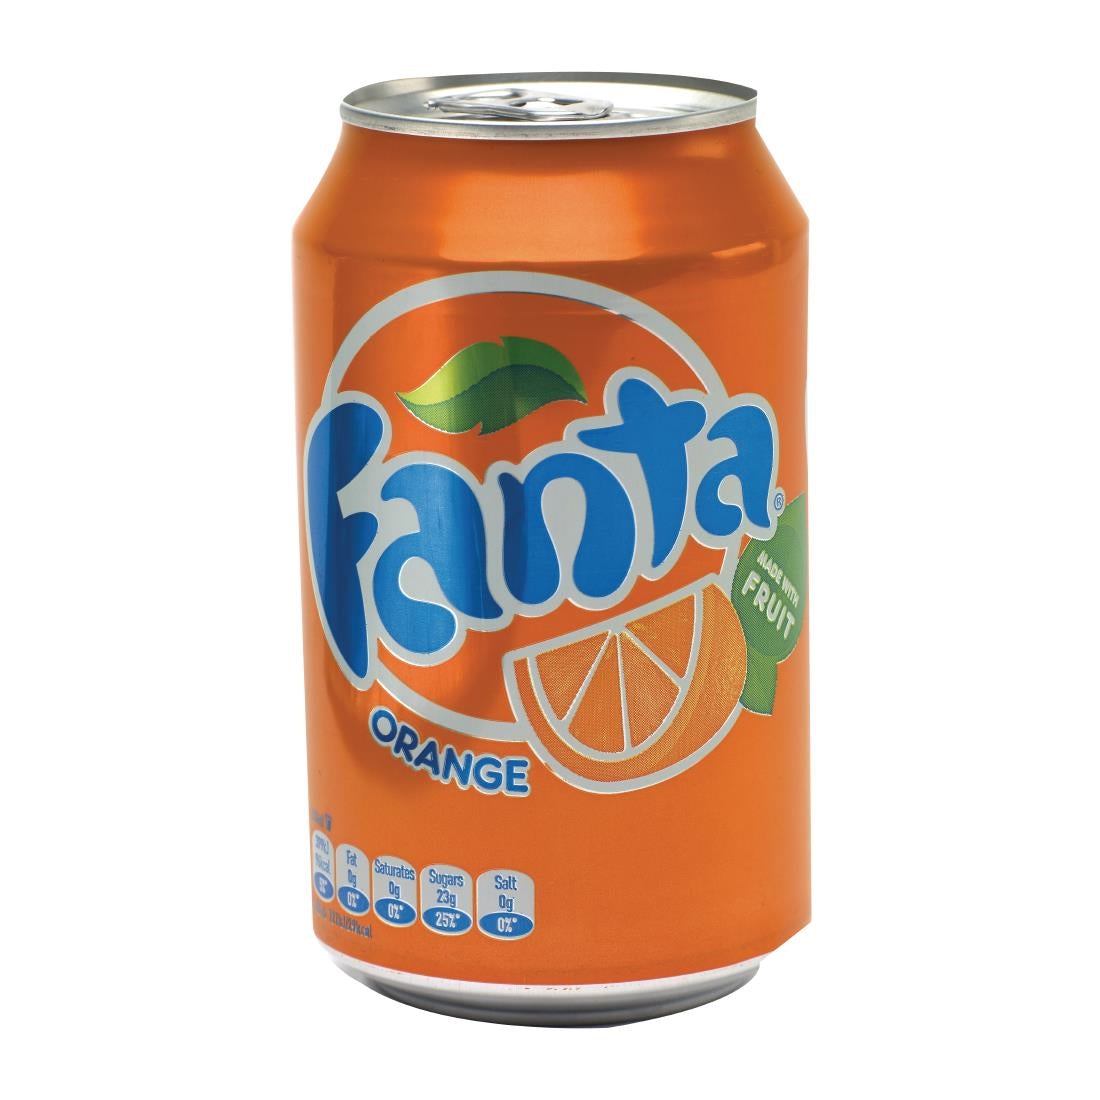 FW834 Fanta Orange Cans 330ml (Pack of 24) JD Catering Equipment Solutions Ltd